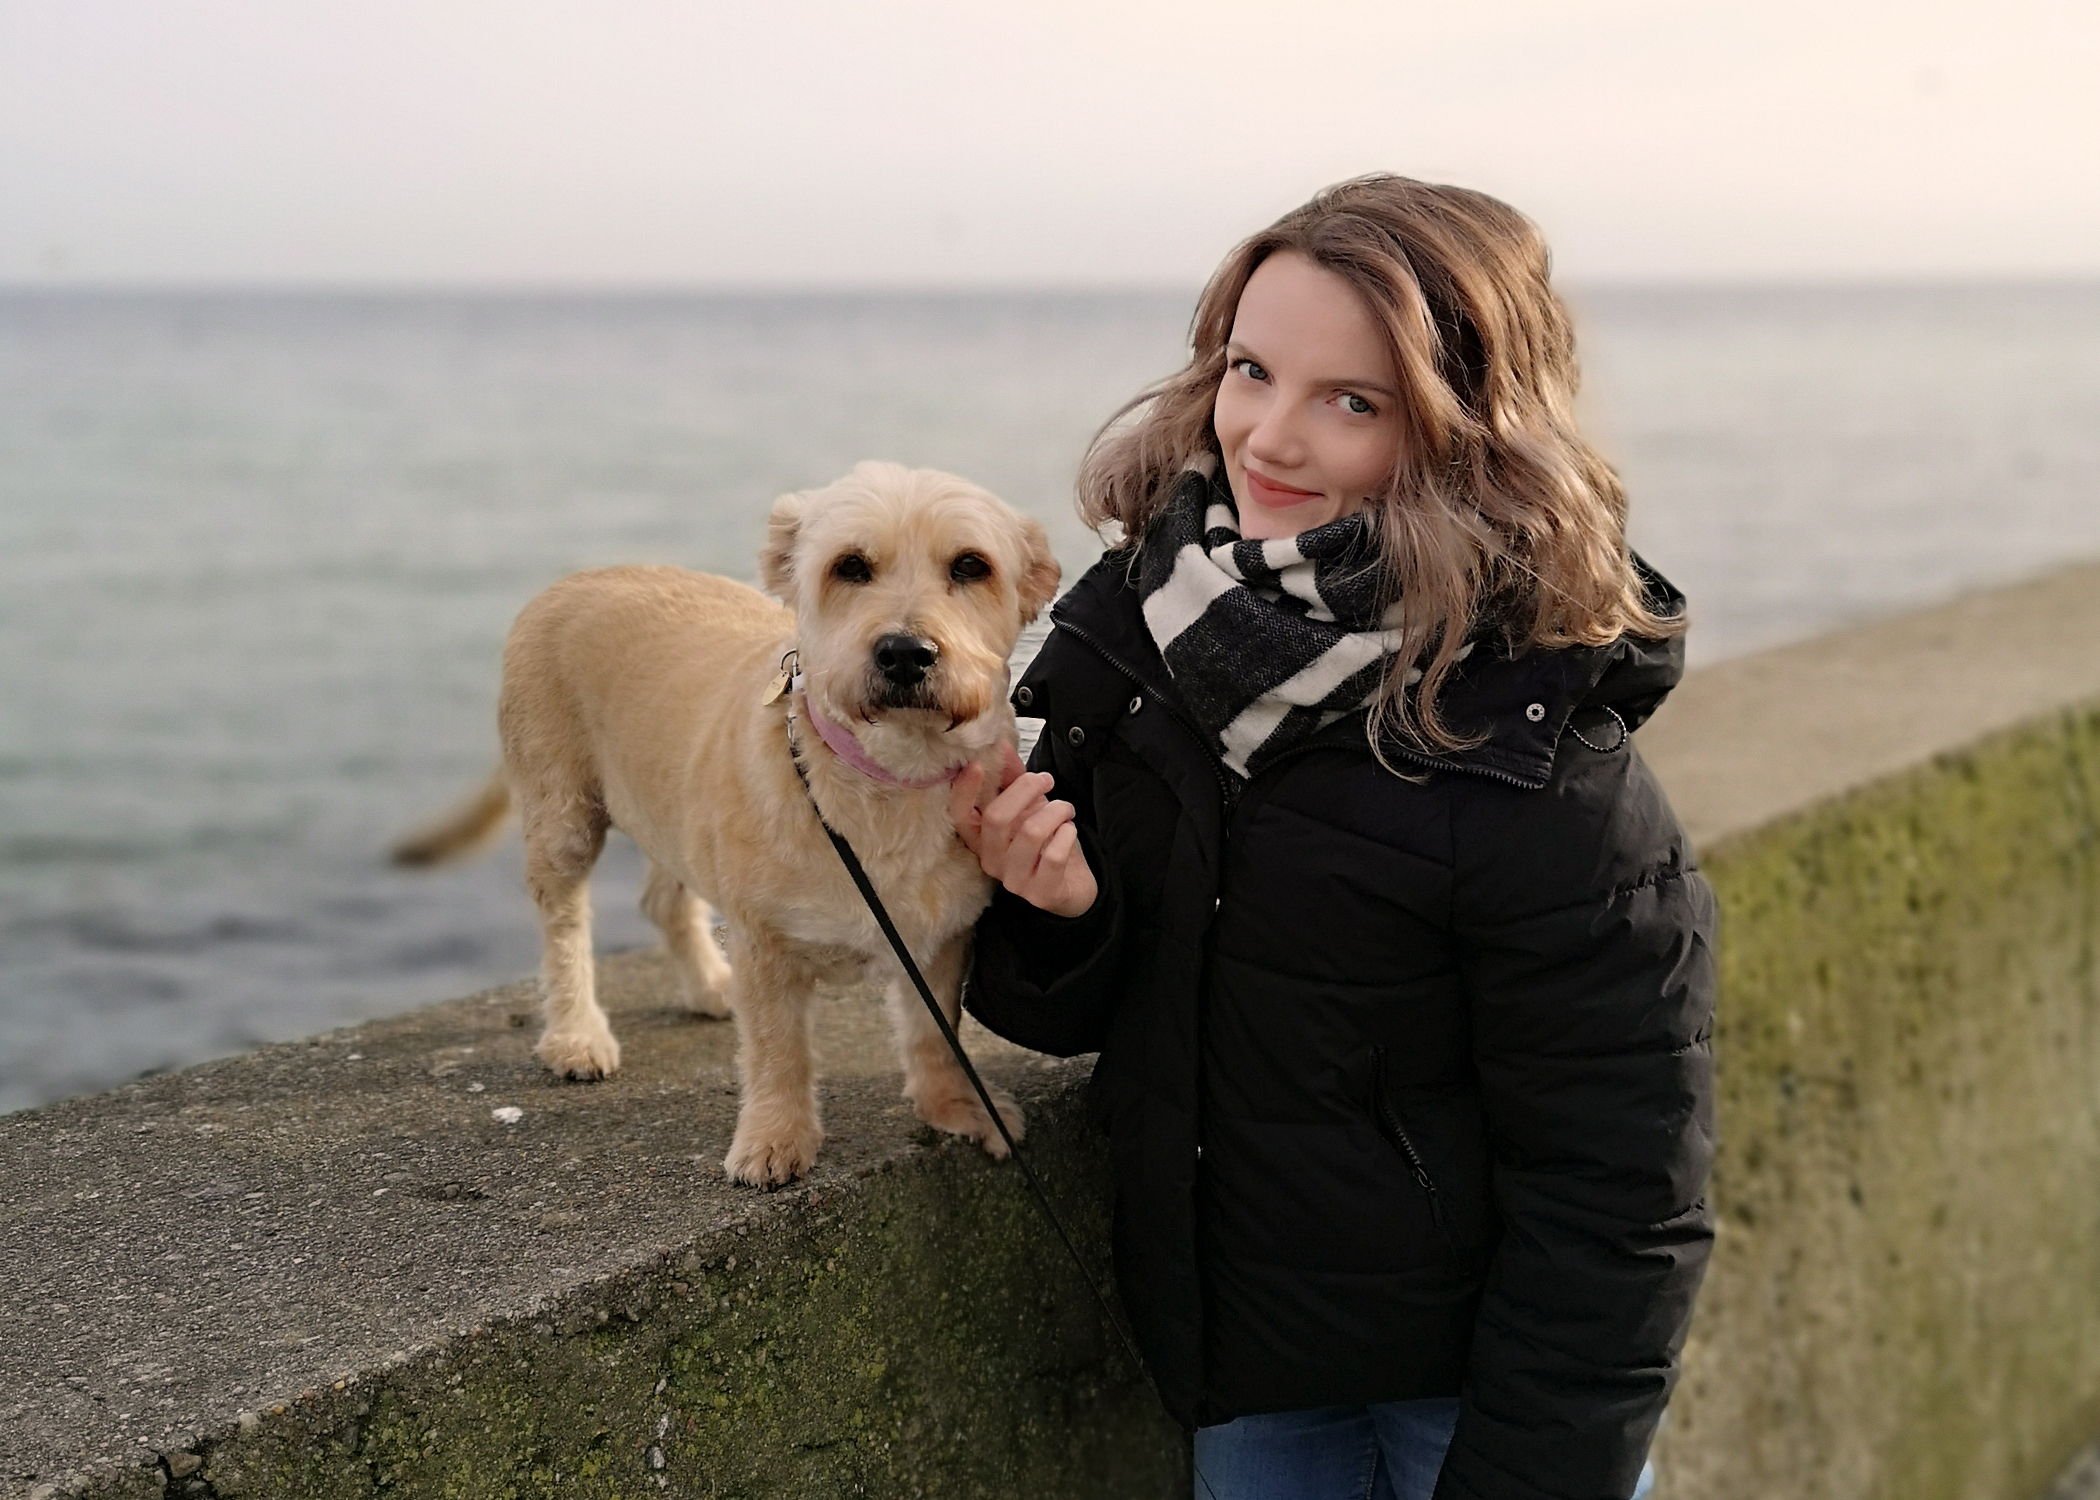 Tableau Public author Kasia Gasiewska-Holc with her dog Topica